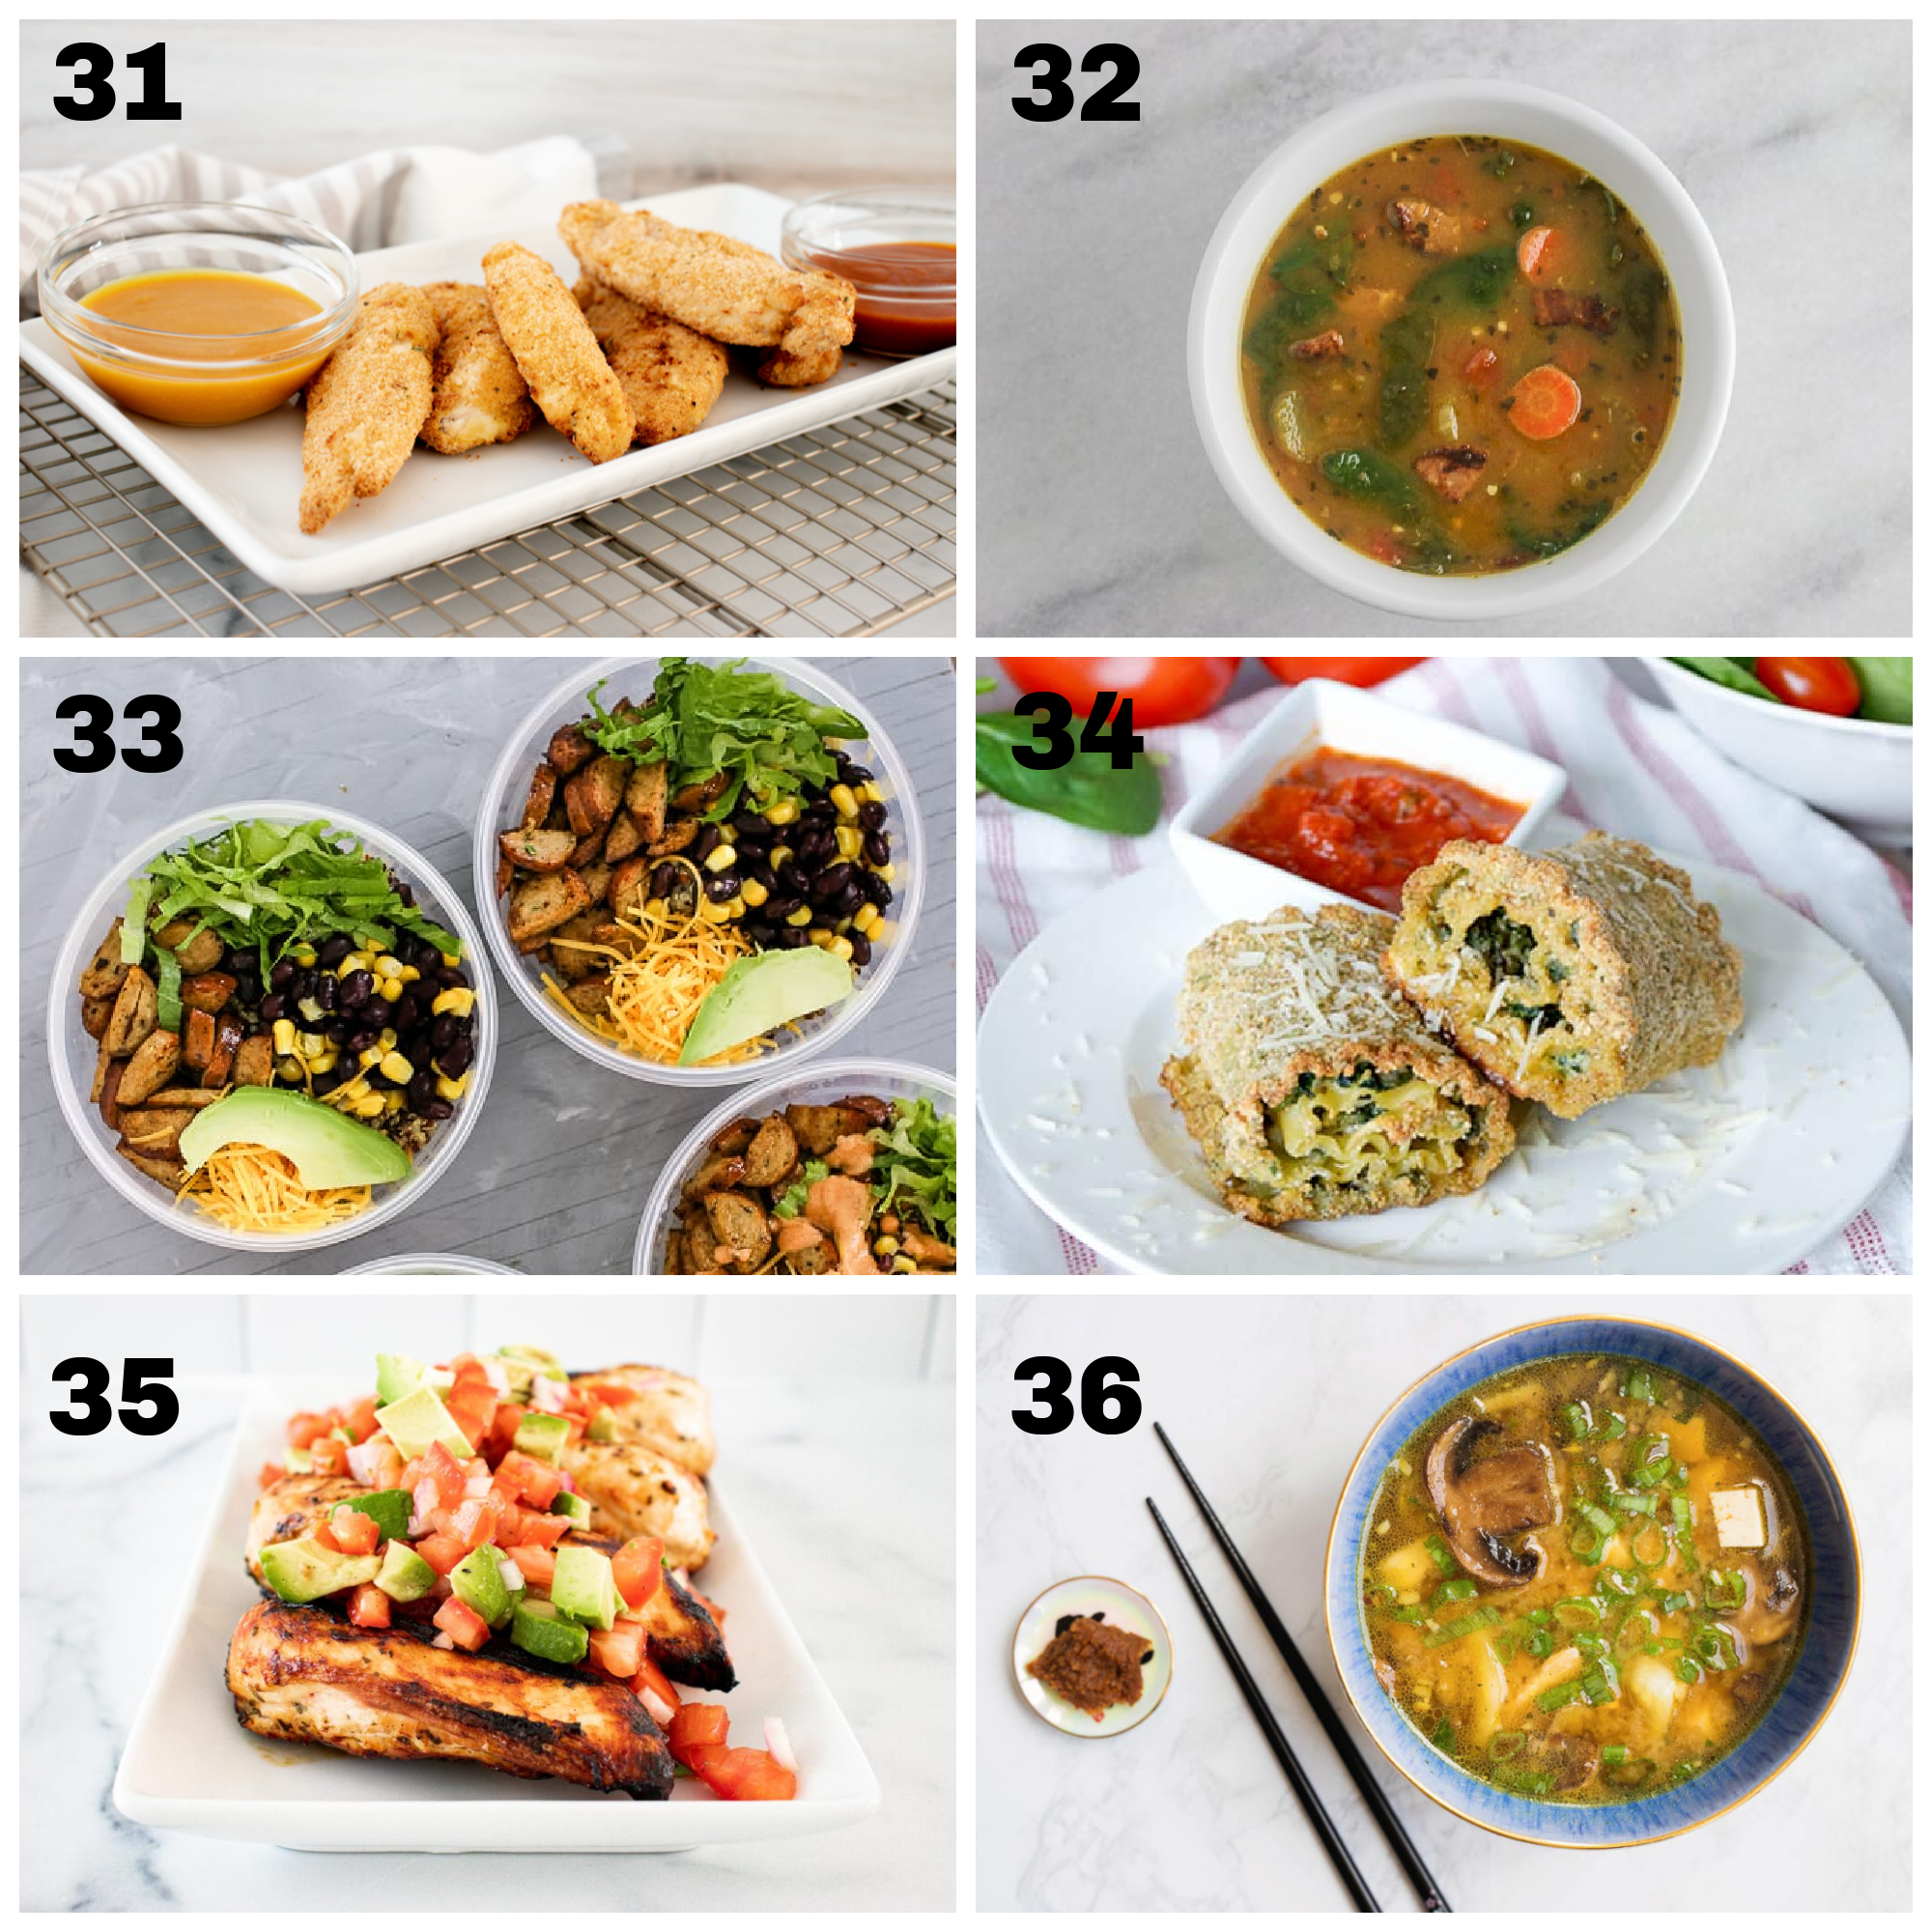 6 completed dinner ideas for making ahead meals under 350 calories labeled 31-36